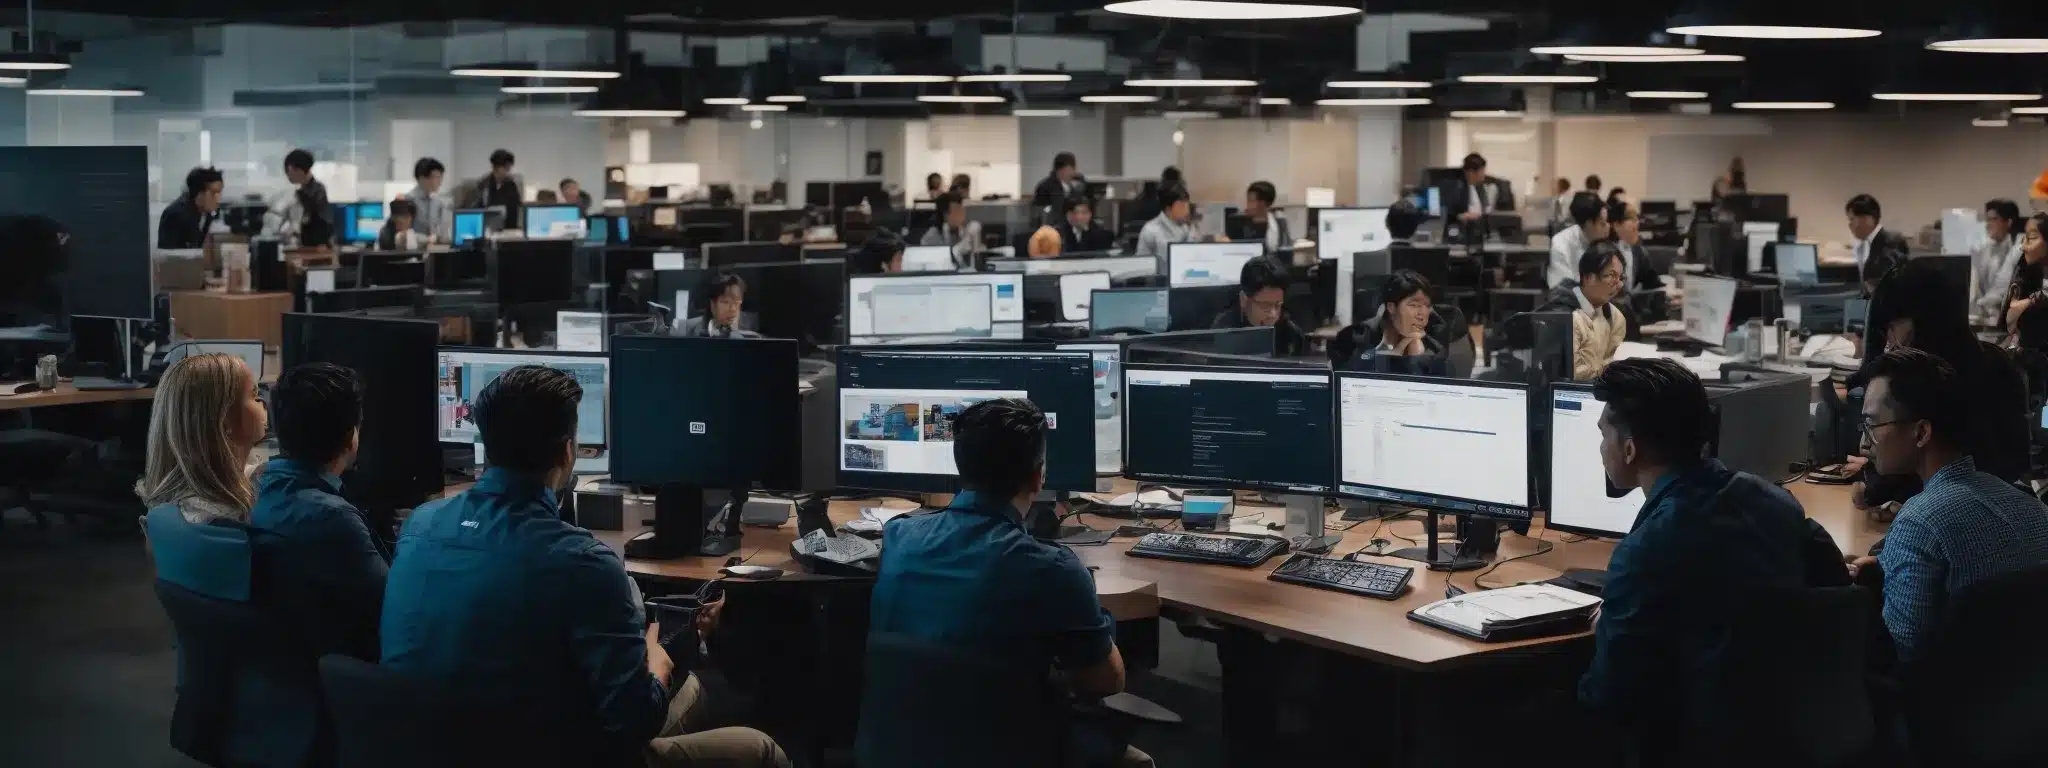 A Bustling Digital Marketing Agency With Teams Strategizing Around Computers Displaying Vibrant Social Media Analytics.